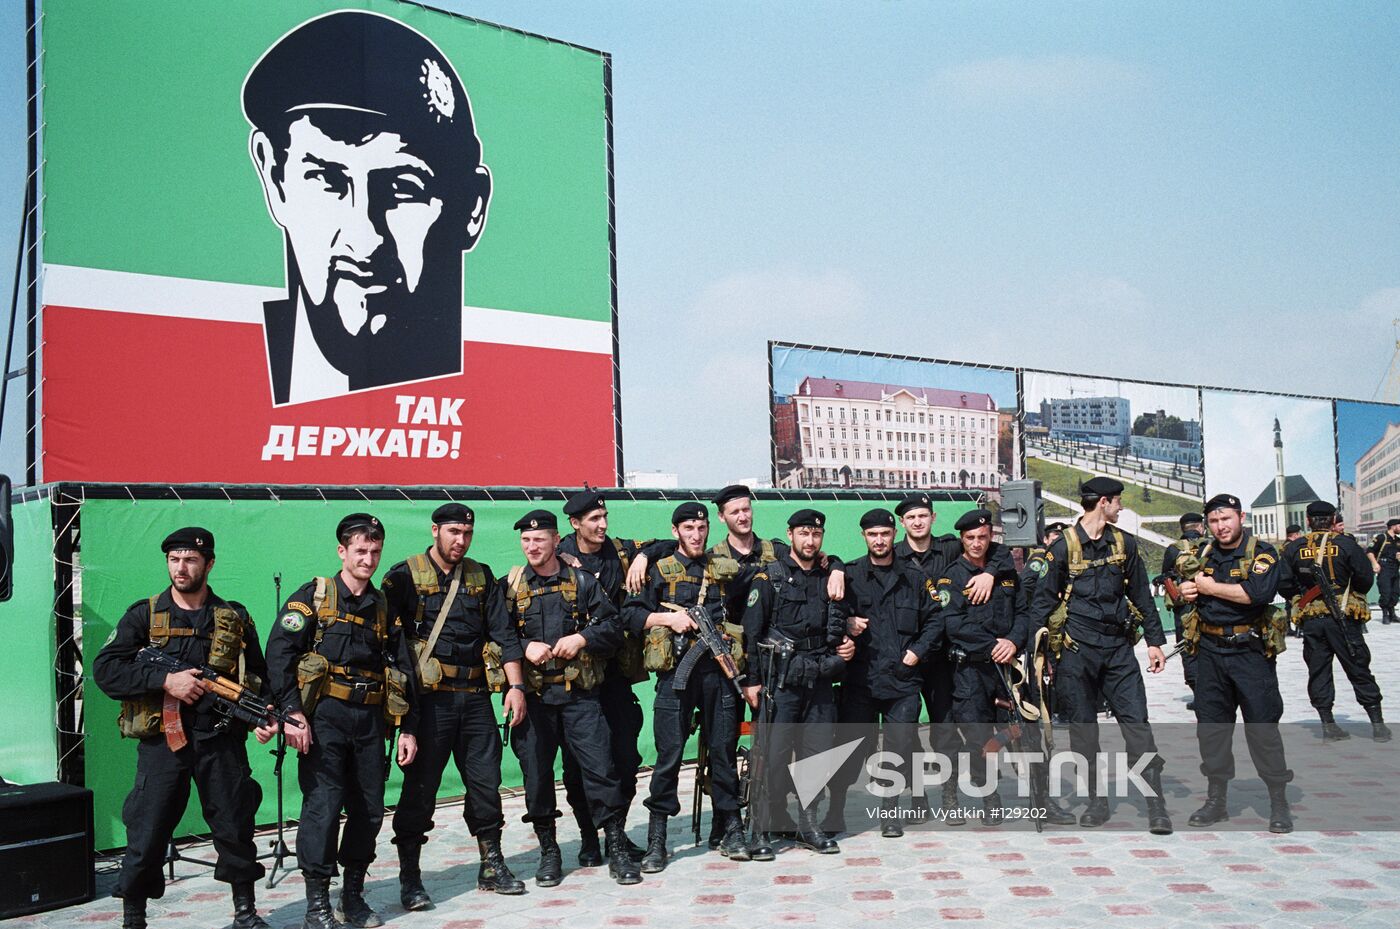 CHECHNYA SPECIAL TROOPS